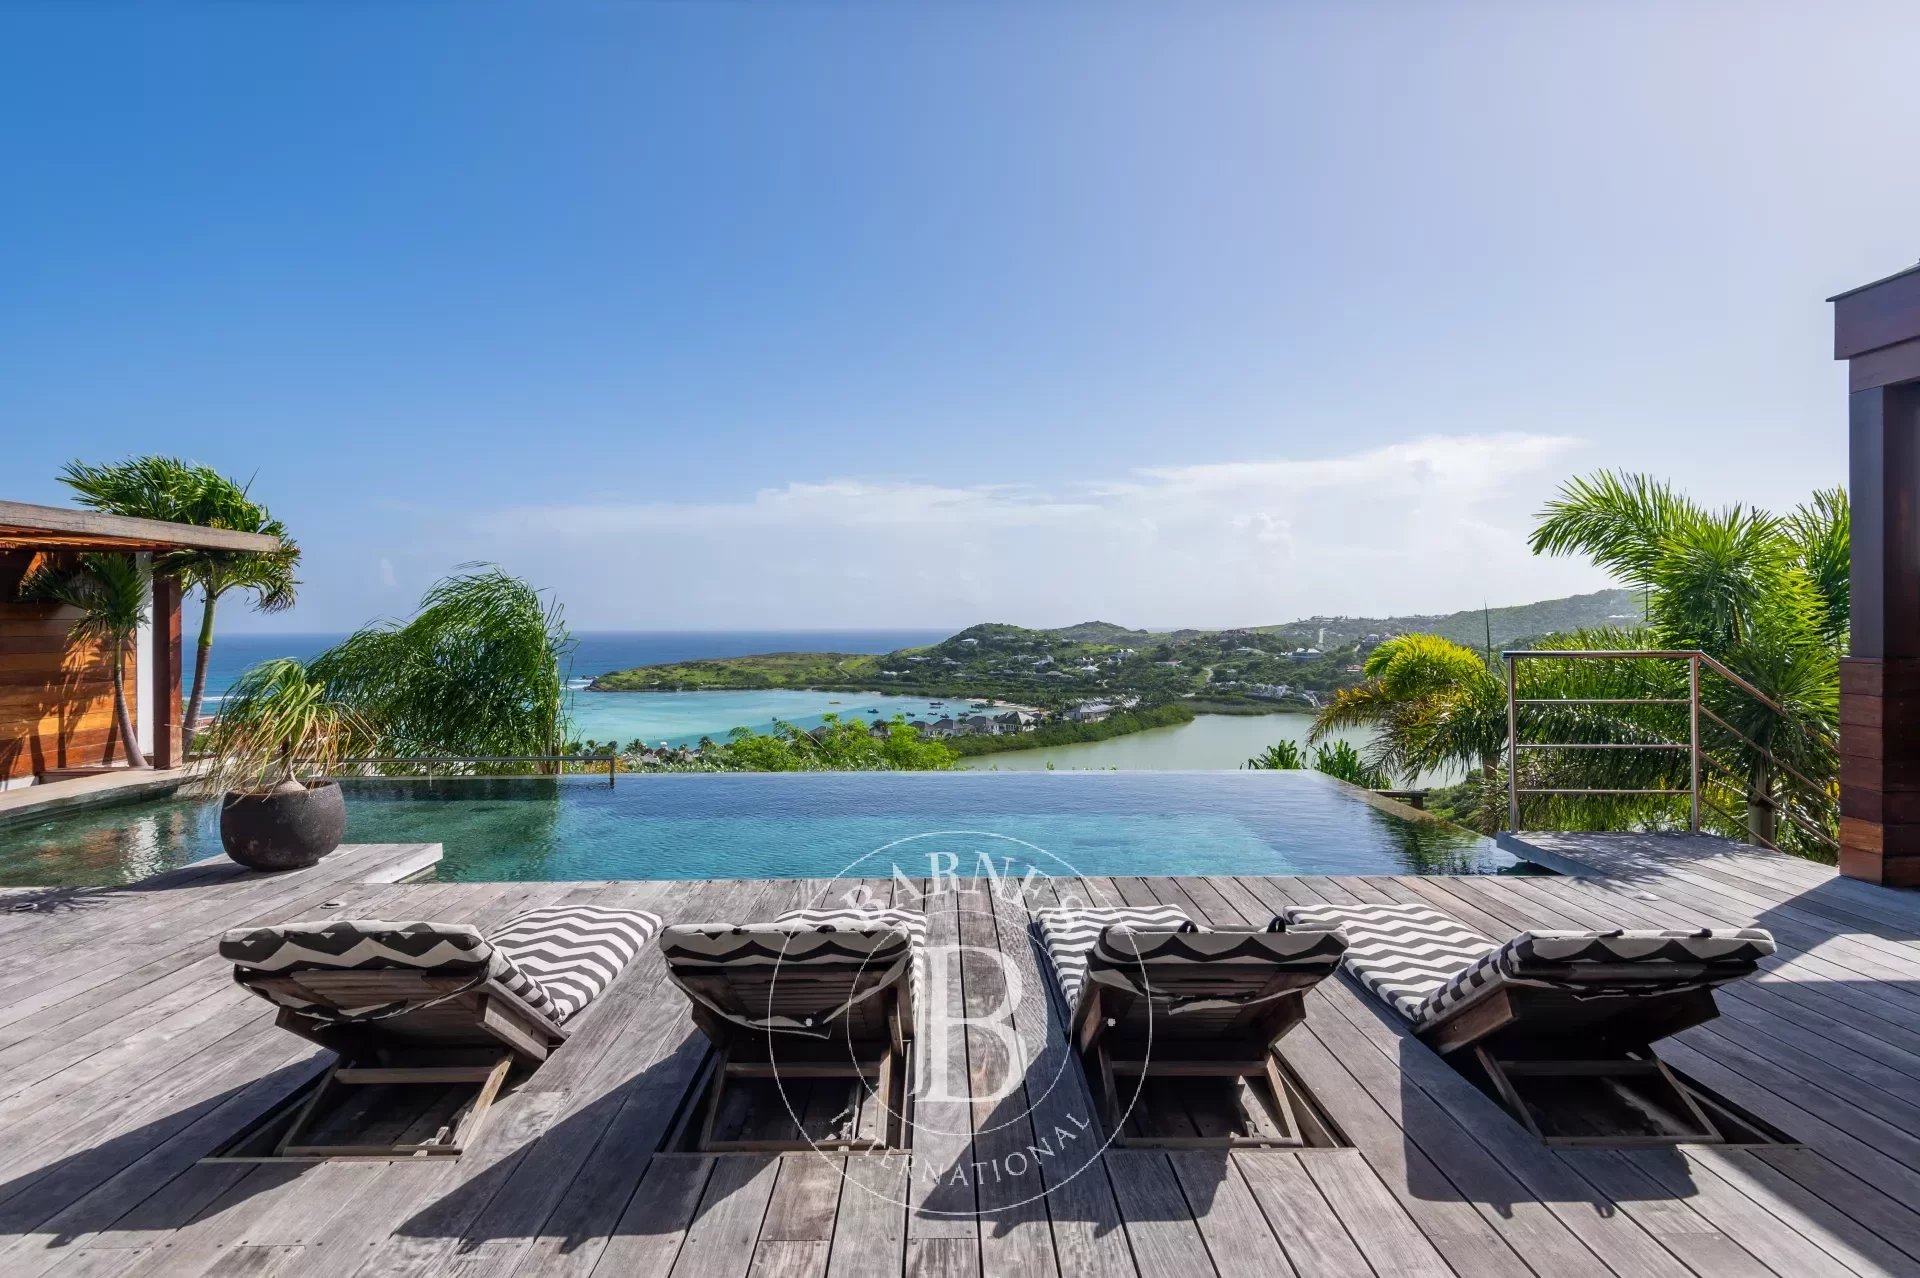 4 -Bedroom Villa in St.Barths - picture 2 title=